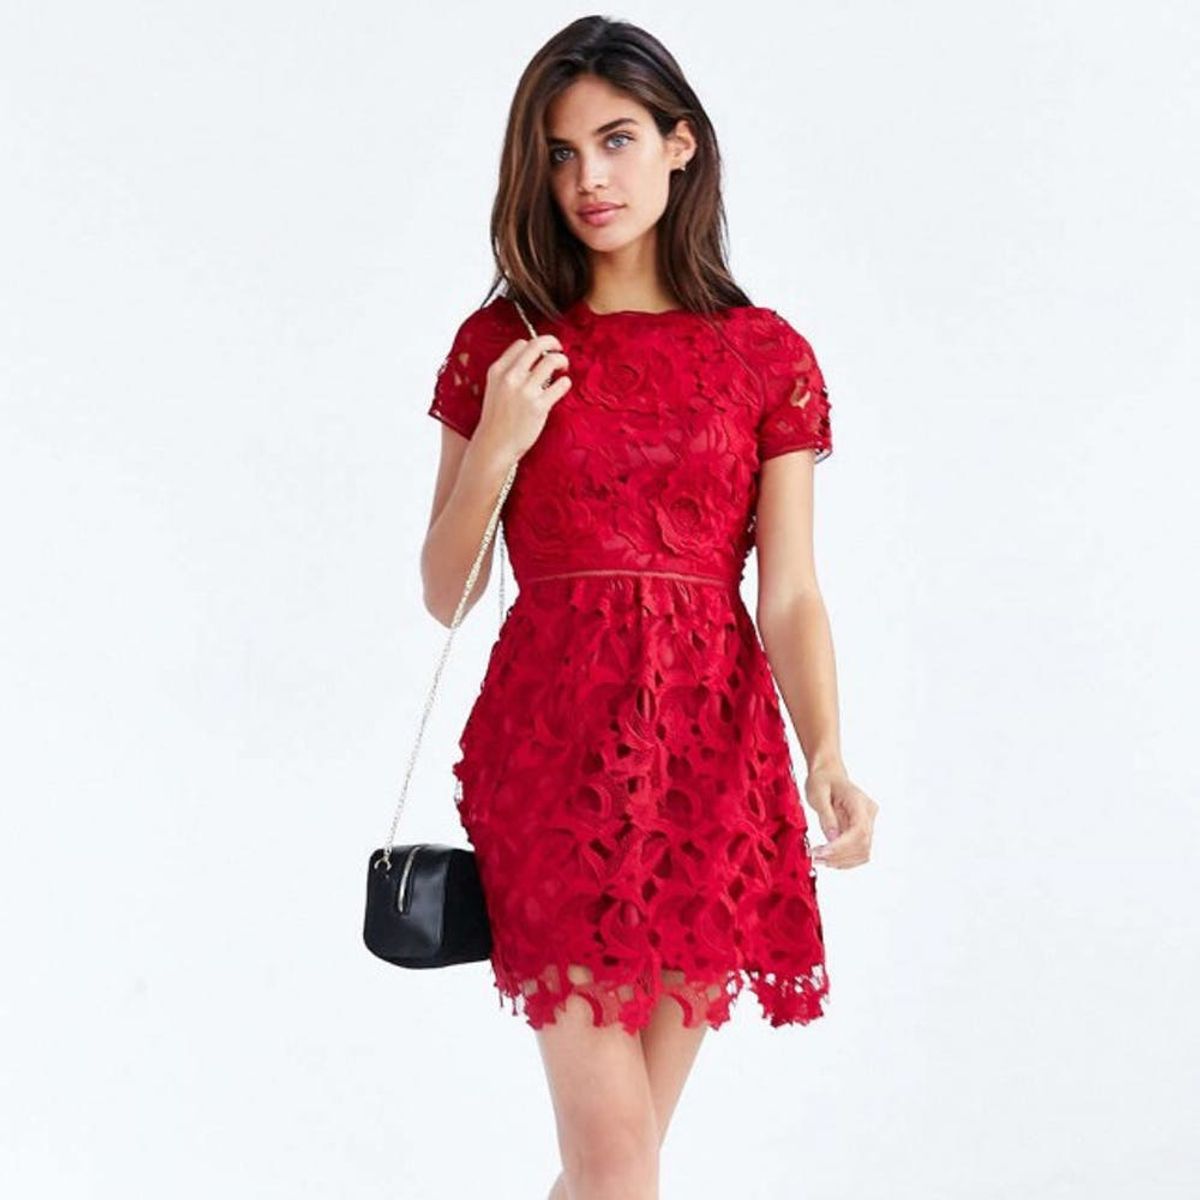 20 Red Dresses for Valentine’s Day That Will Straight Up Slay